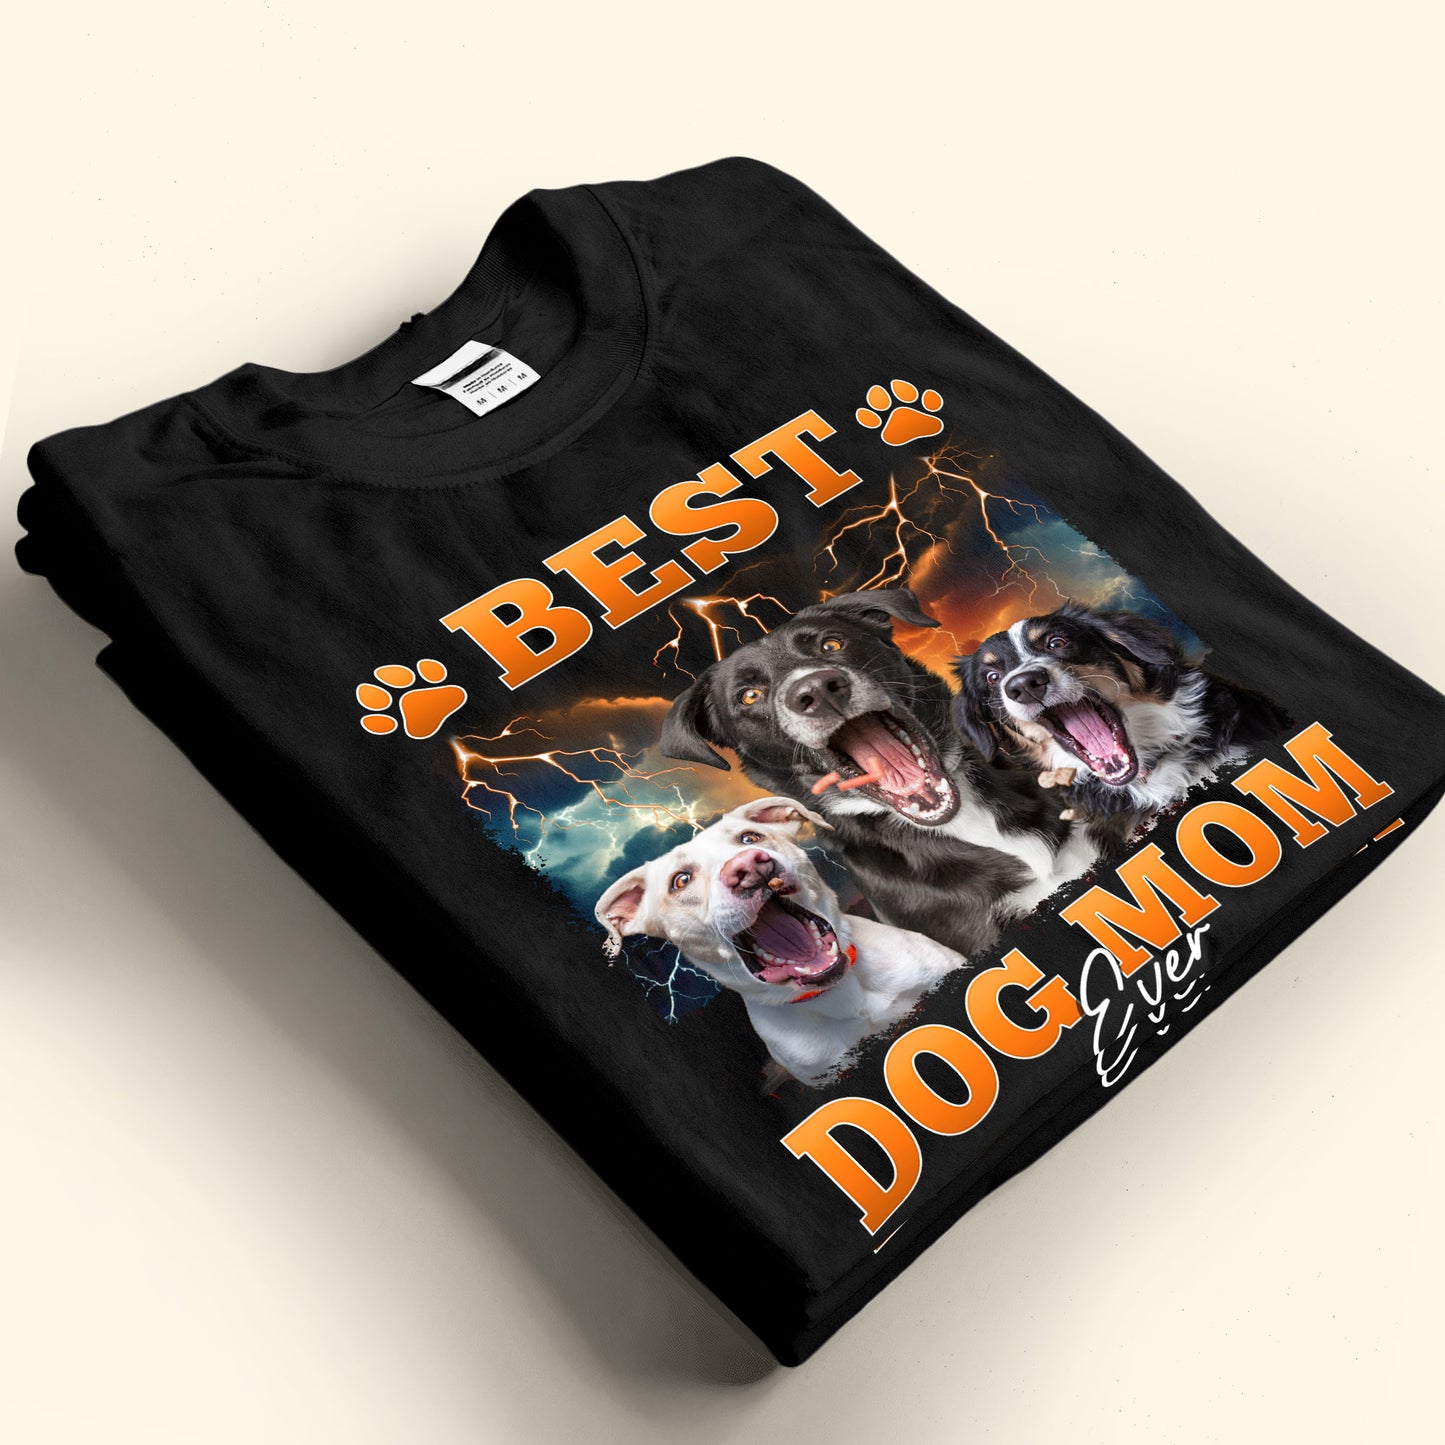 Best Dog Mom Ever - Personalized Photo Shirt